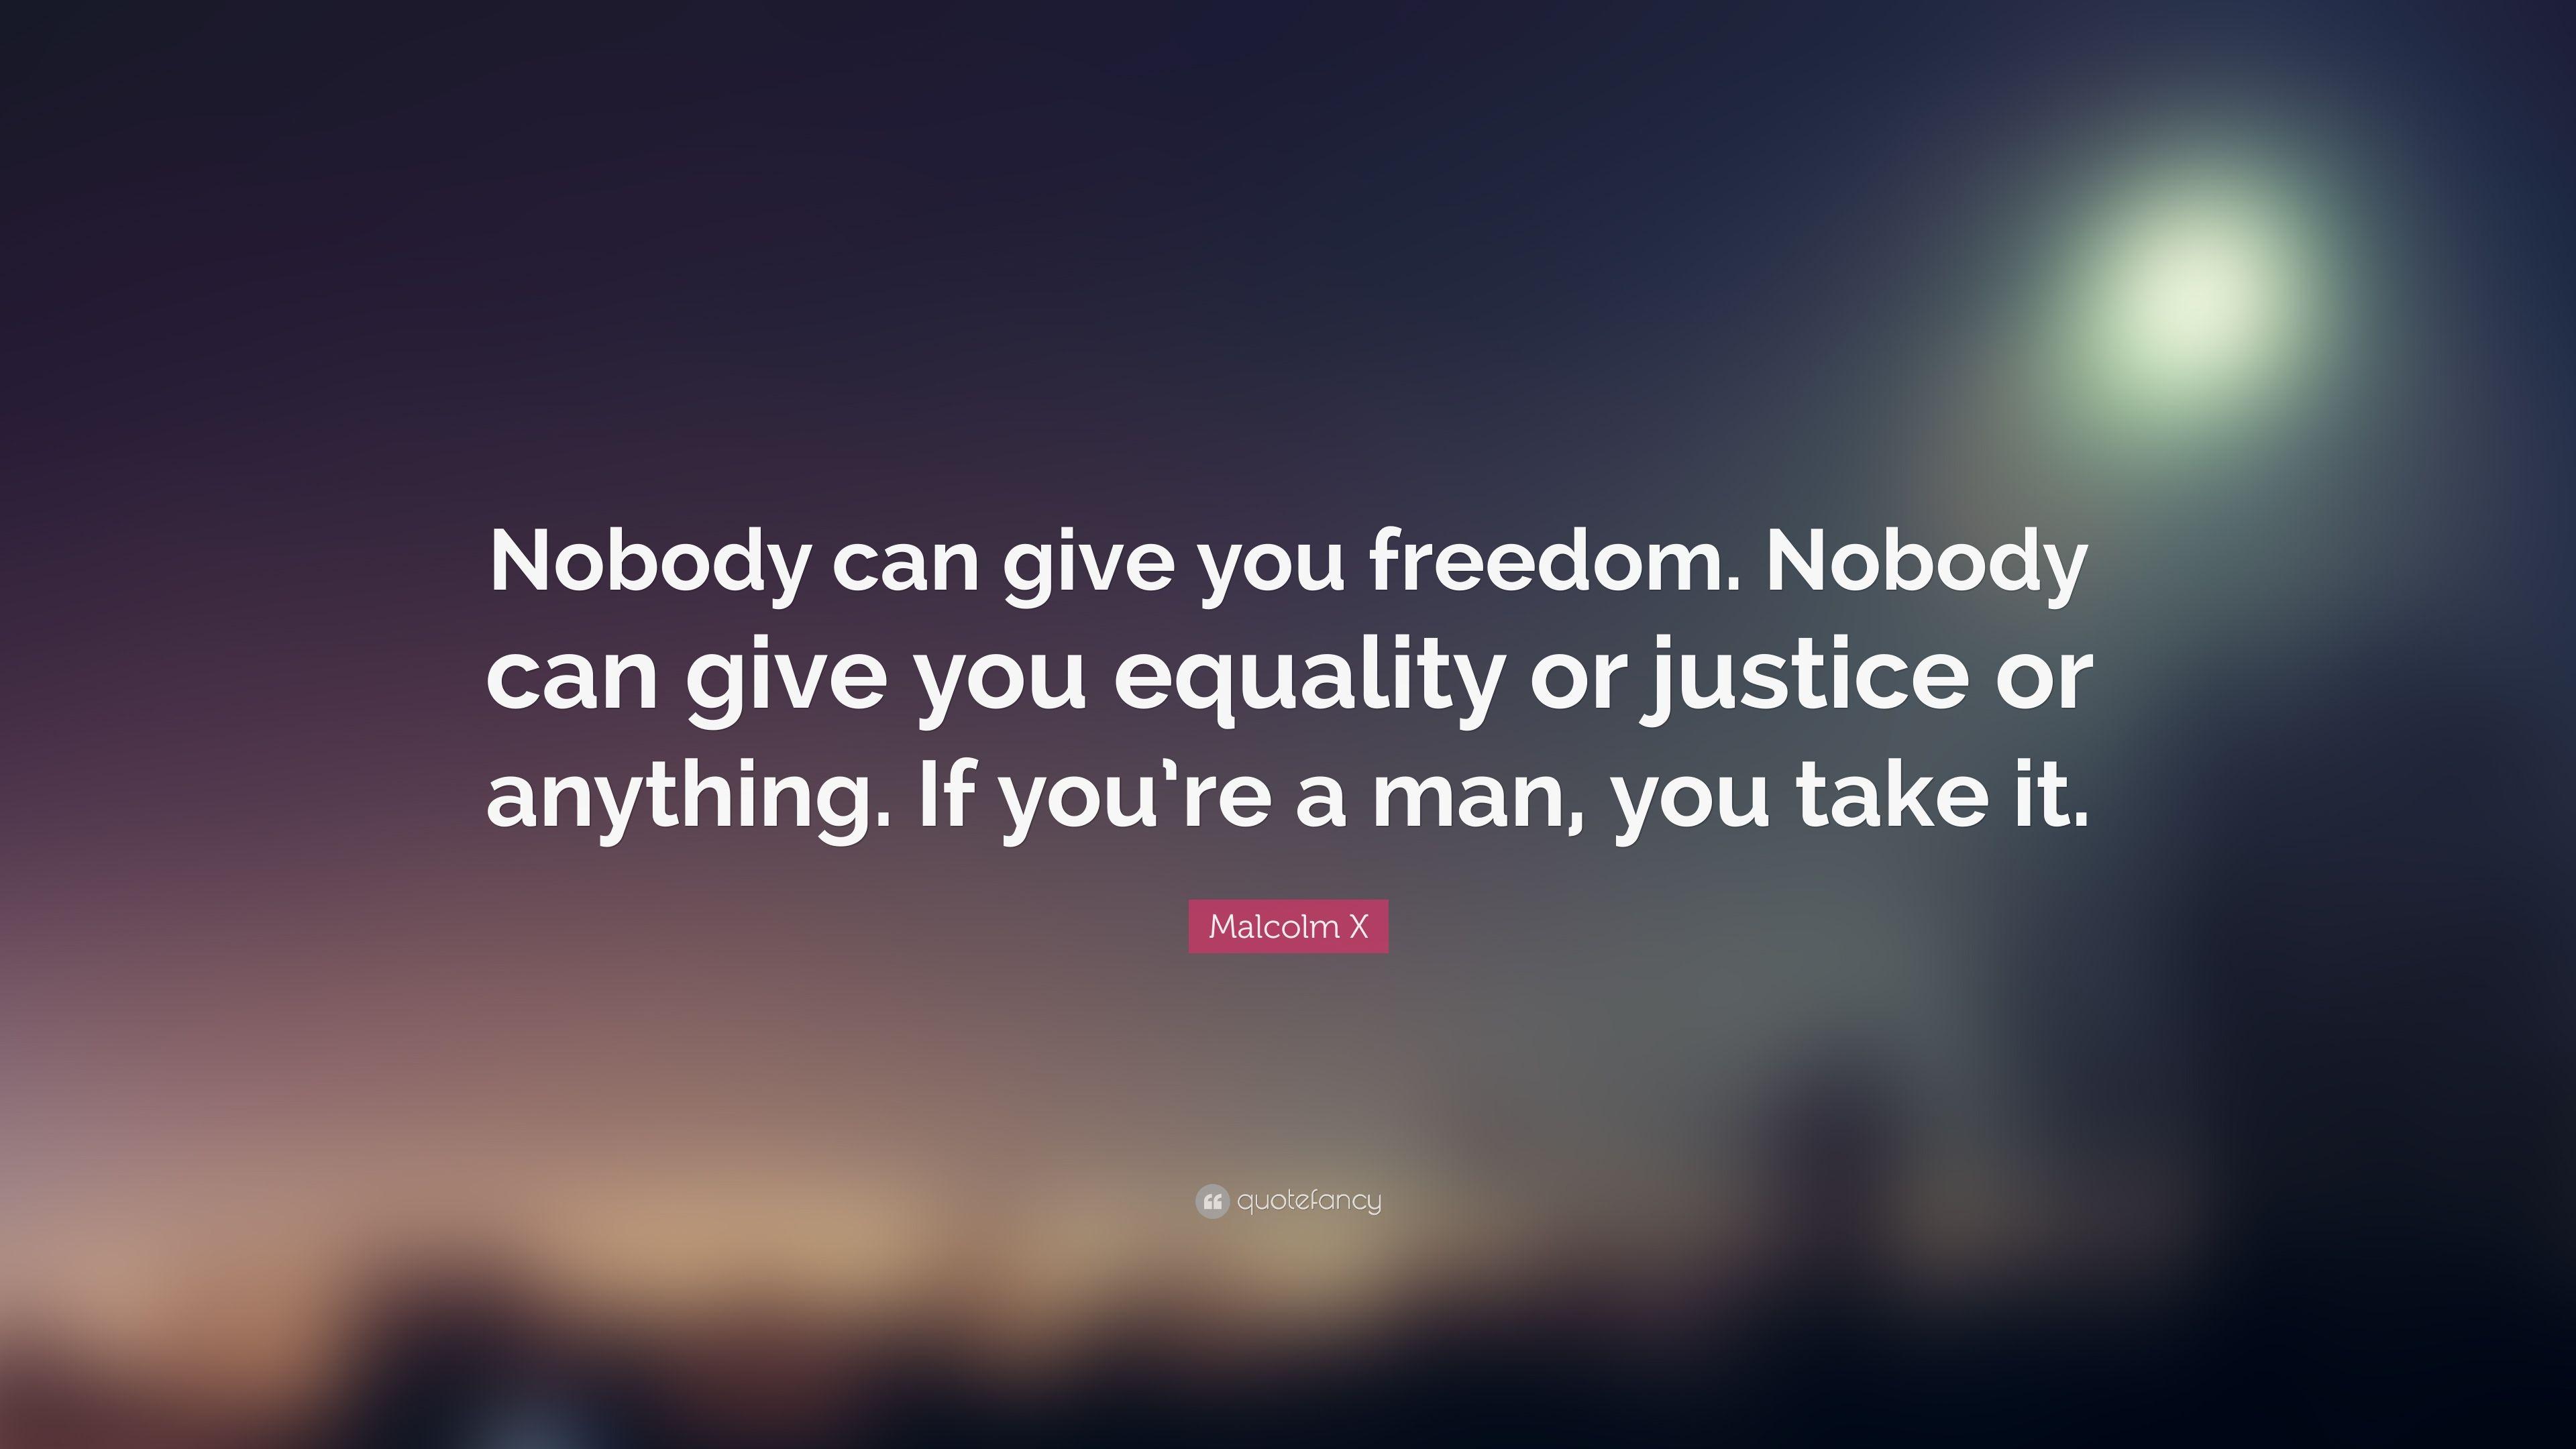 Malcolm X Quote: “Nobody can give you freedom. Nobody can give you